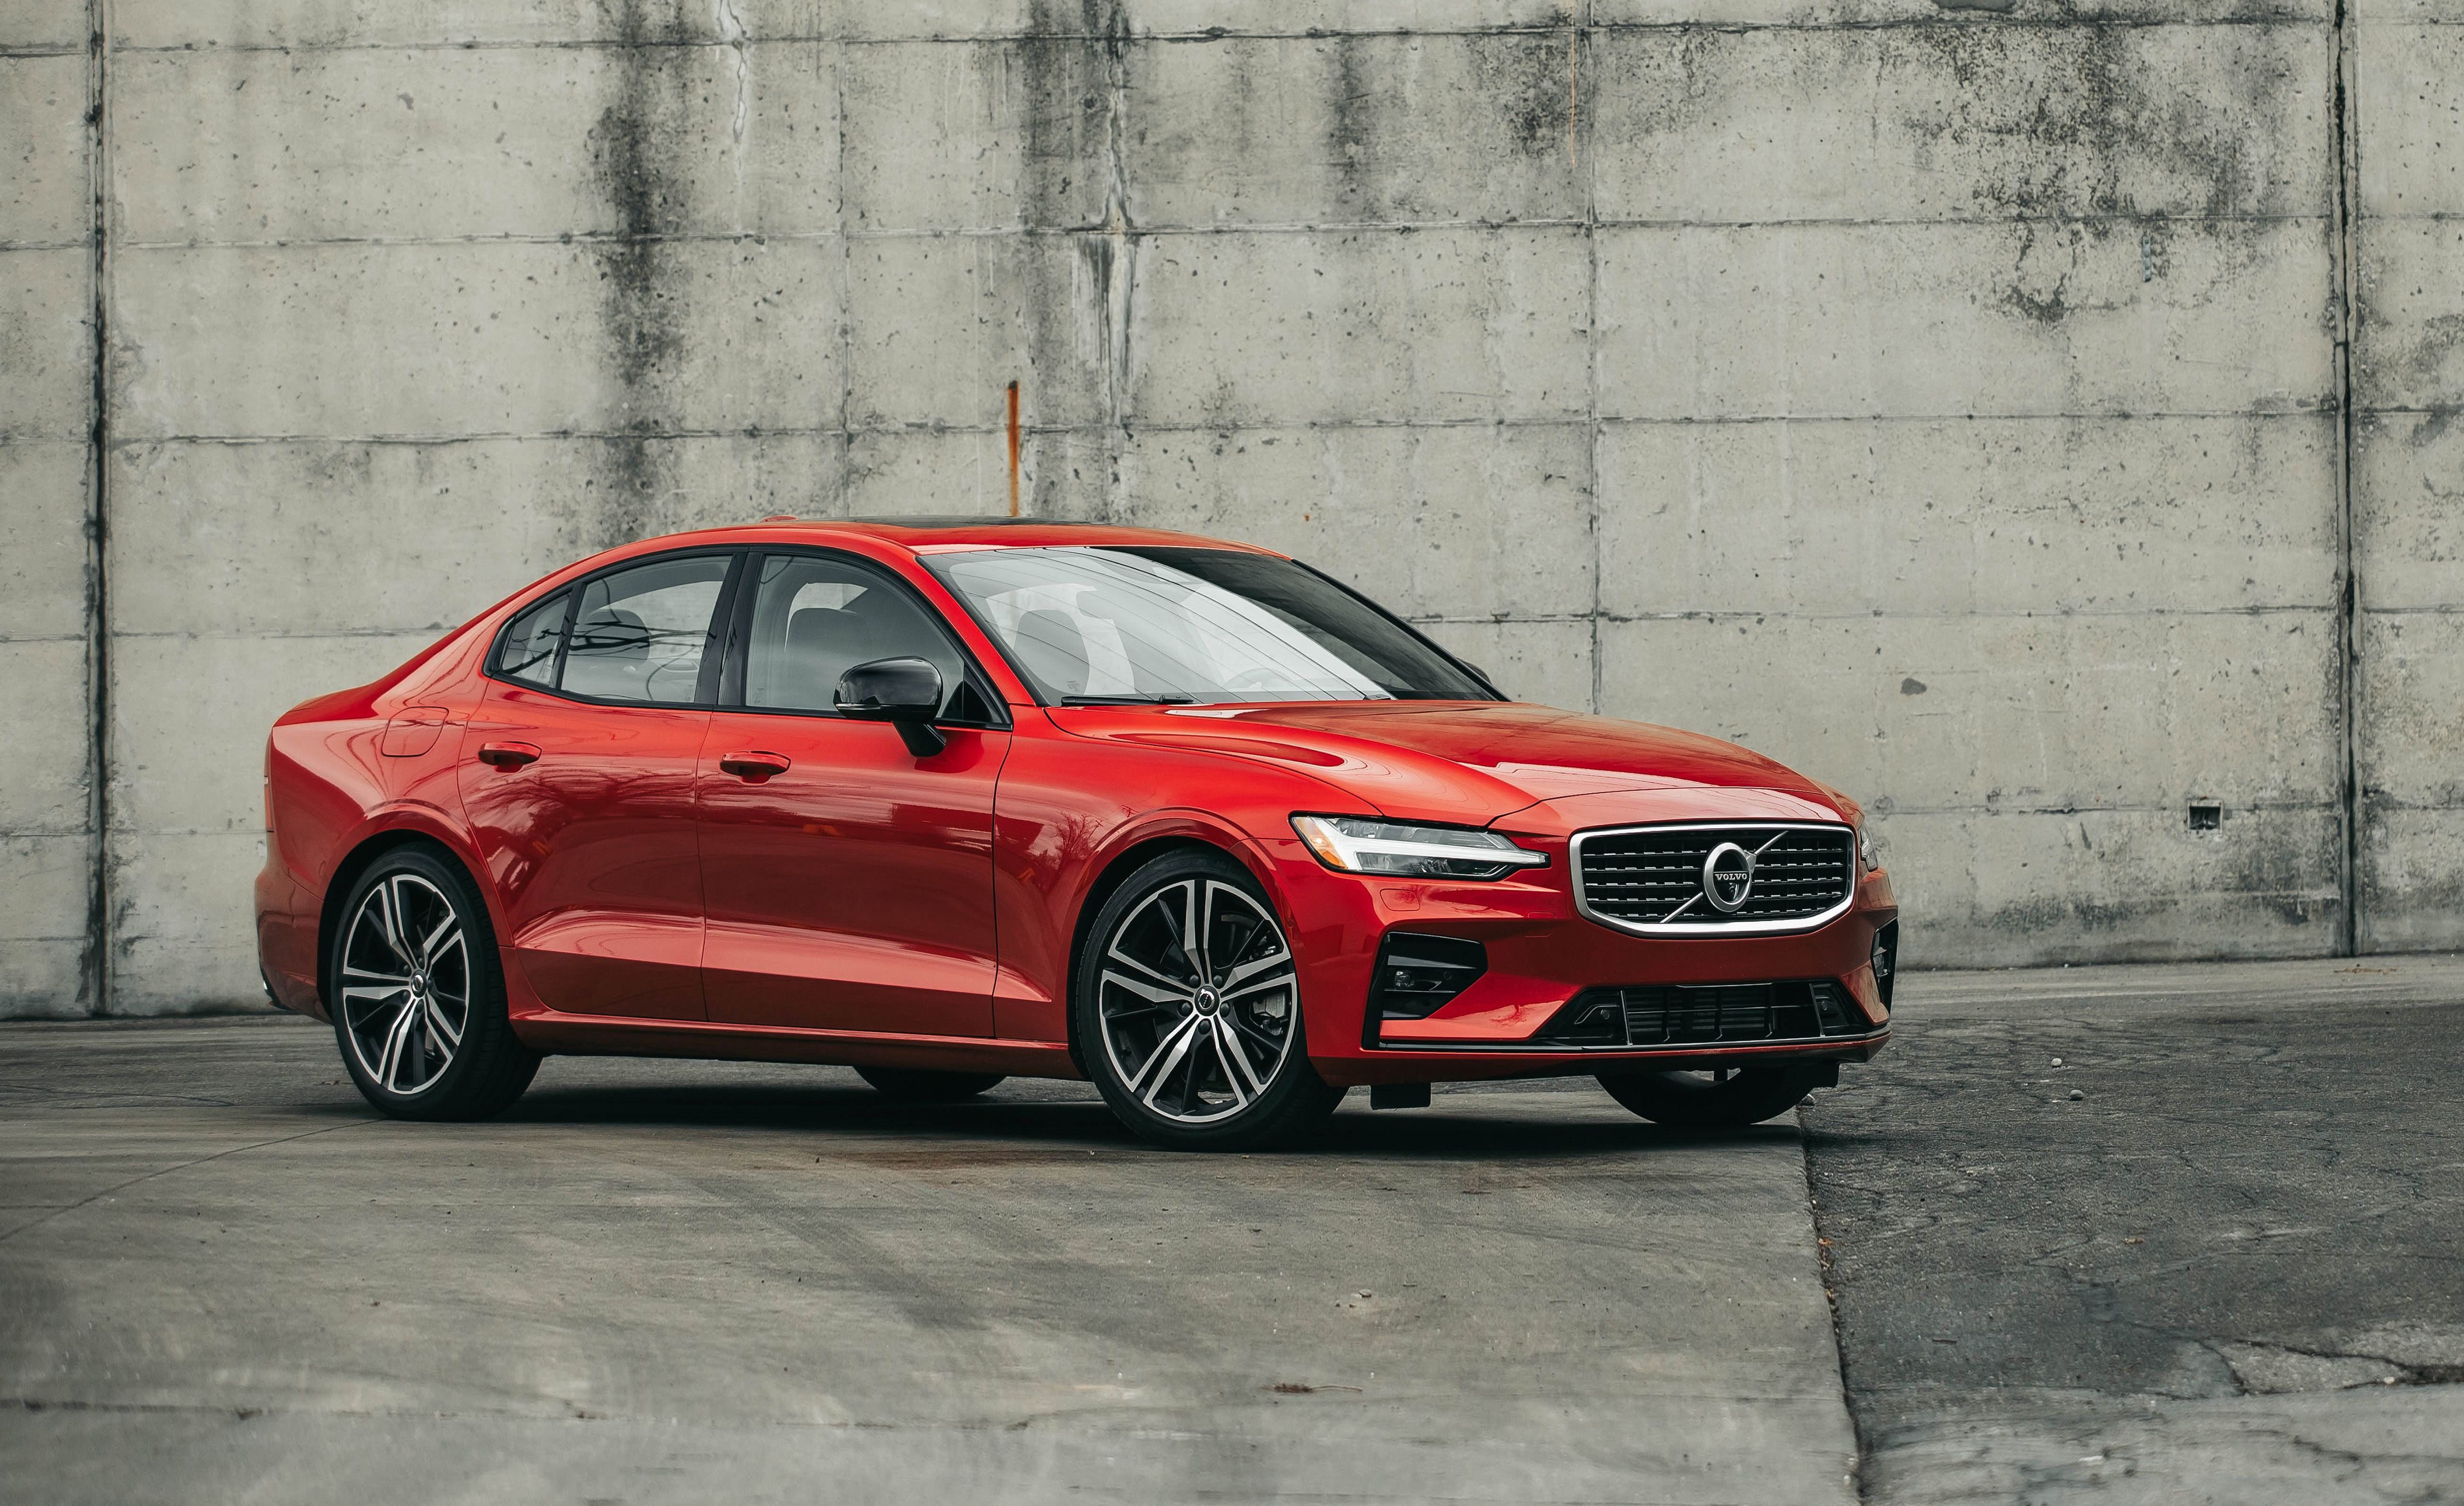 2019 Volvo S60 Reviews Volvo S60 Price, Photos, and Specs Car and